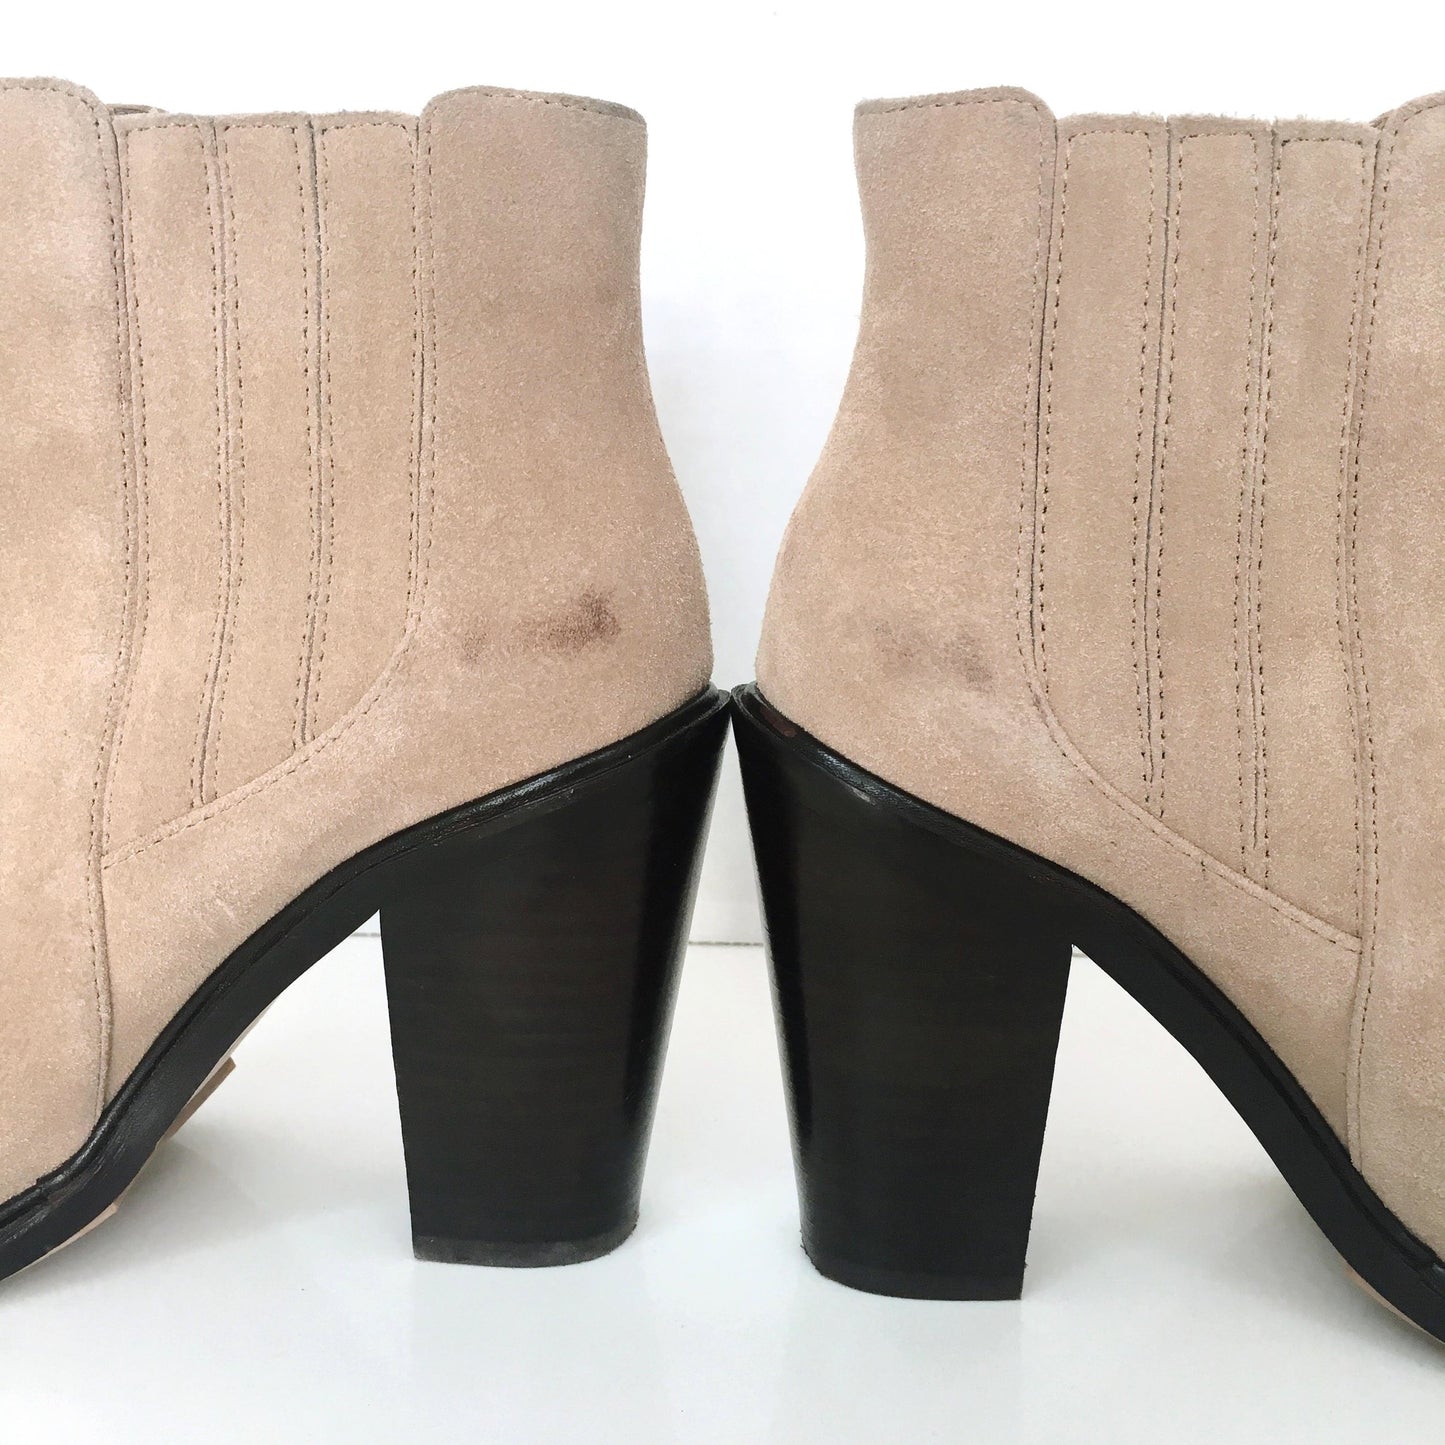 Joie Cloee suede heeled Boot - size 37